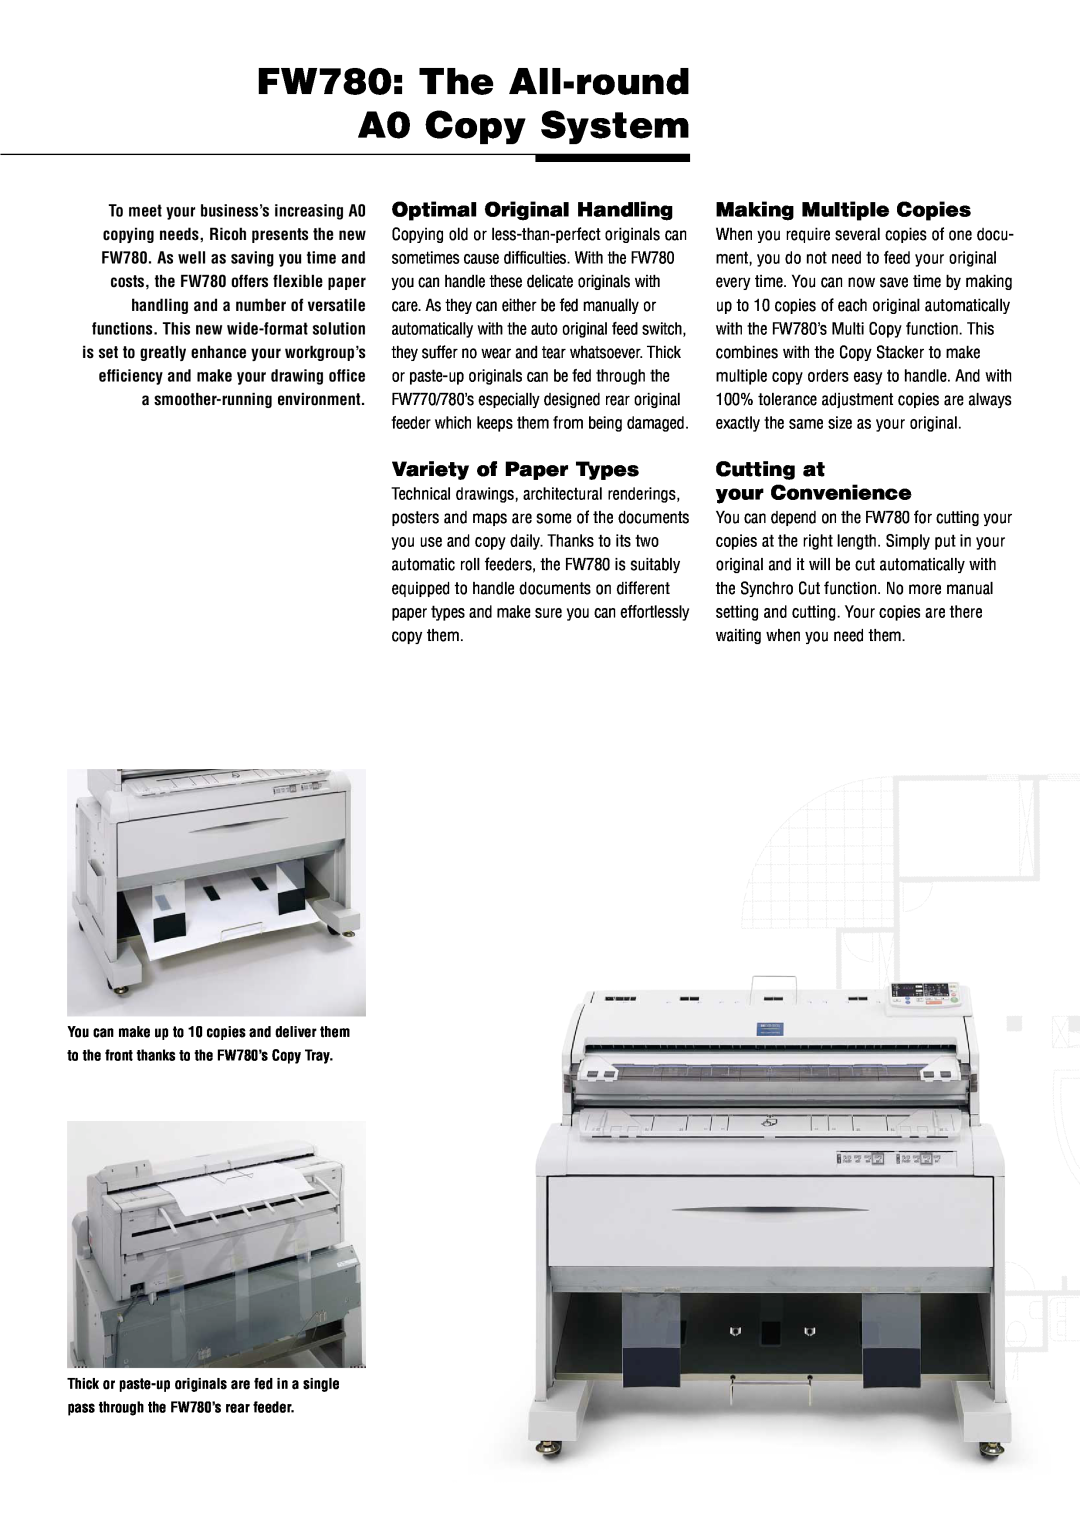 Ricoh FW780 The All-round A0 Copy System, Optimal Original Handling, Making Multiple Copies, Variety of Paper Types 